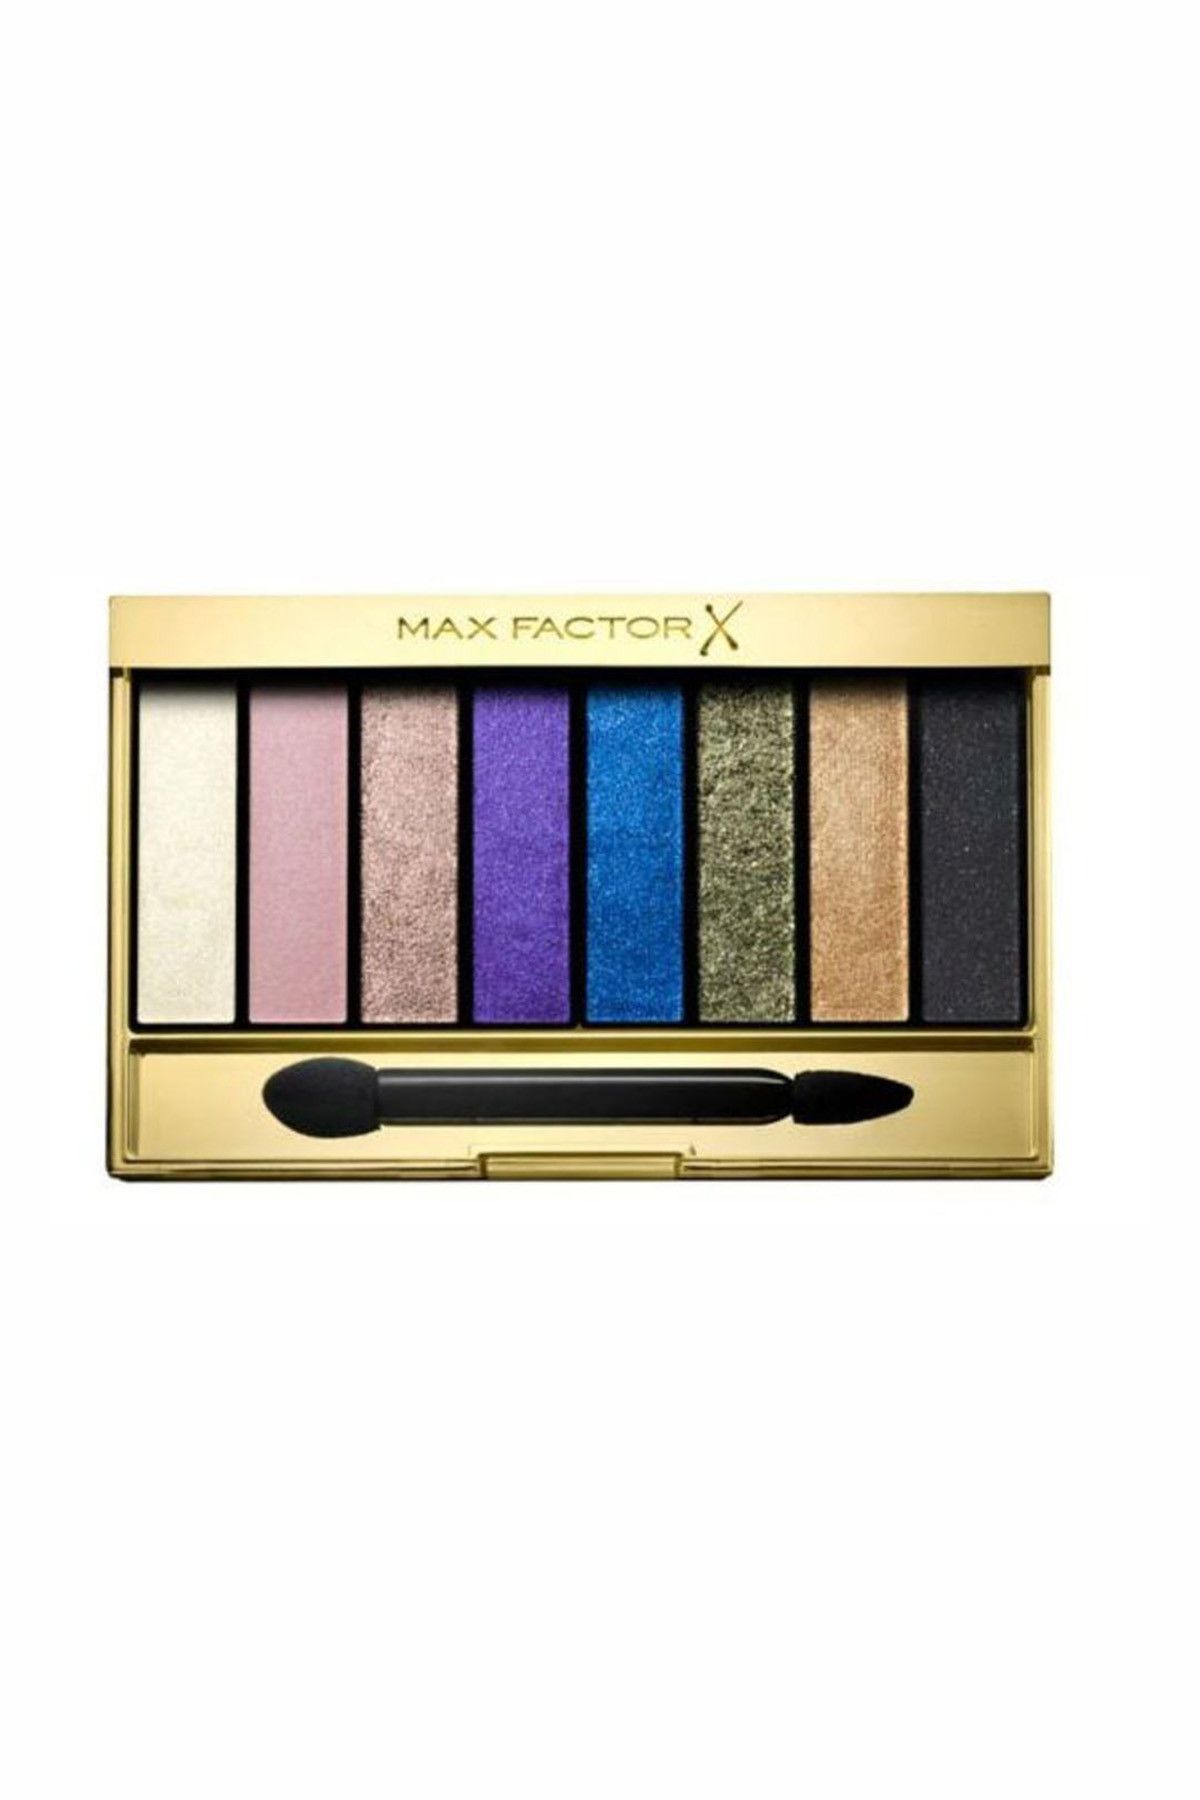 Max Factor Far Paleti - Masterpiece Nude Palette Eyeshadow 04 Orchid Nudes 4015400919629